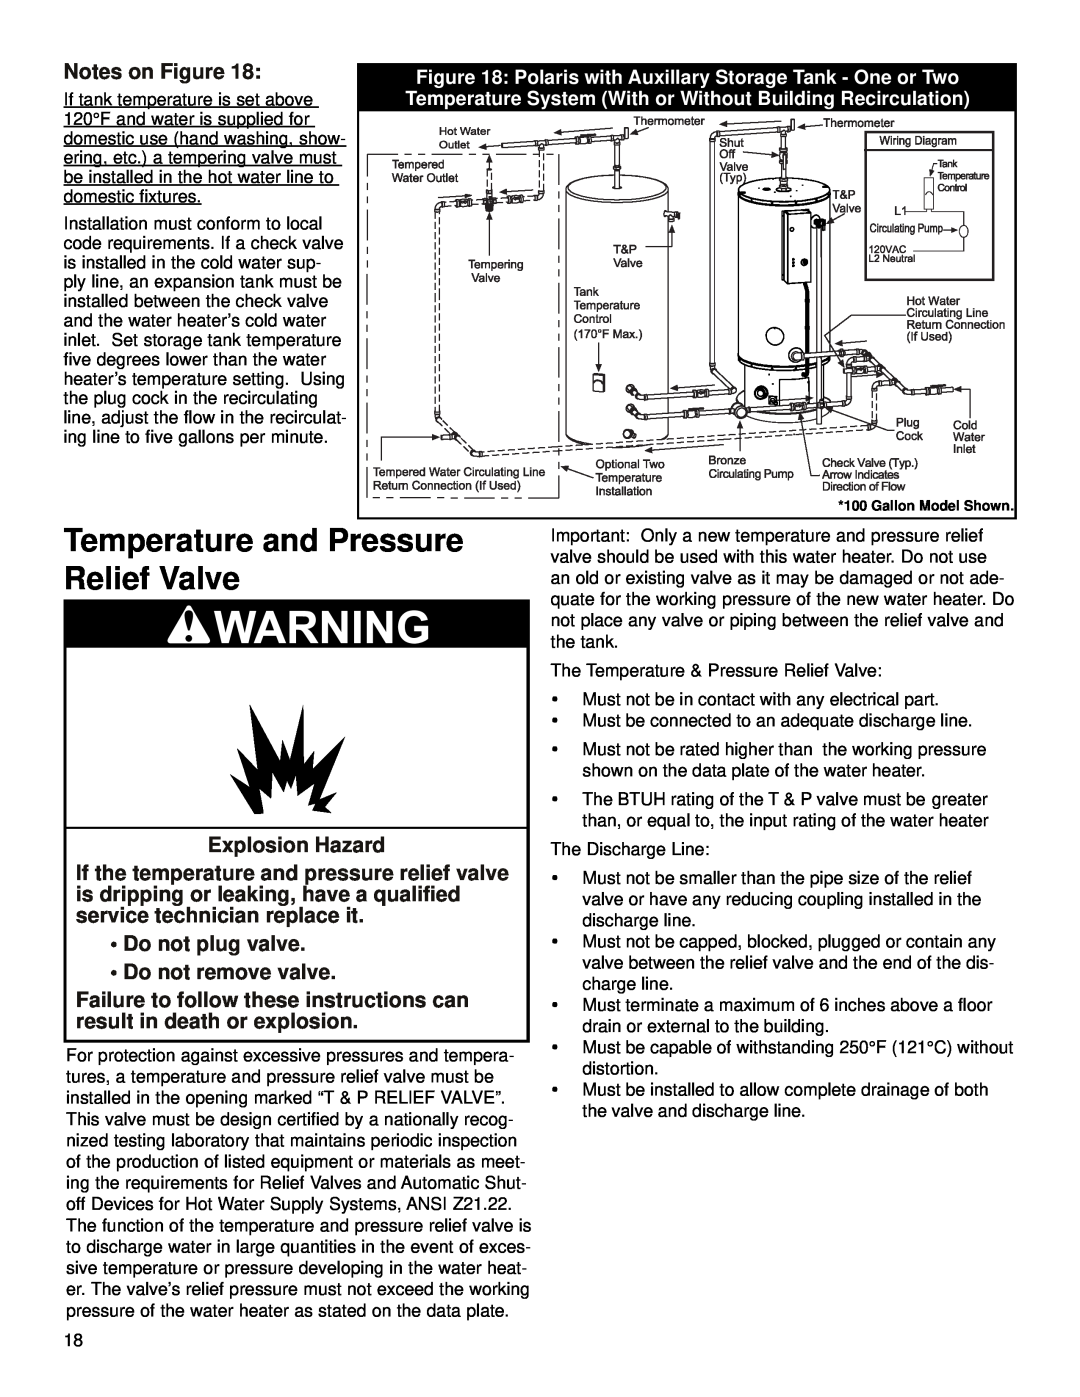 American International PG10*50-199-3NV or 3PV Temperature and Pressure, Relief Valve, Notes on Figure, Explosion Hazard 